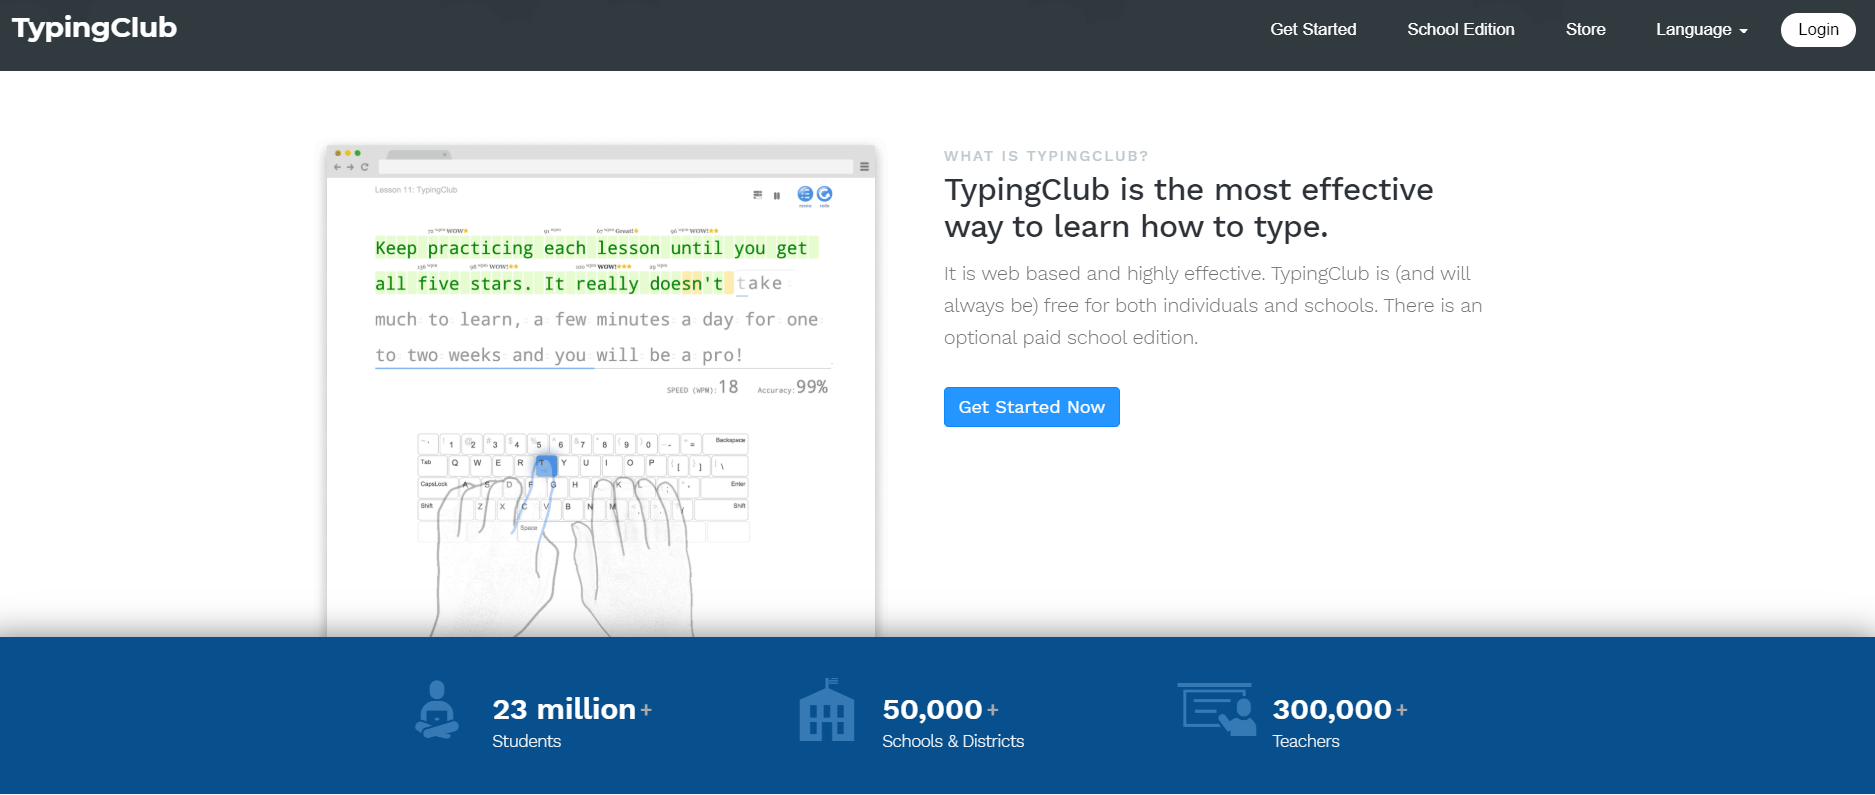 Landing page to enter the Typing Club website